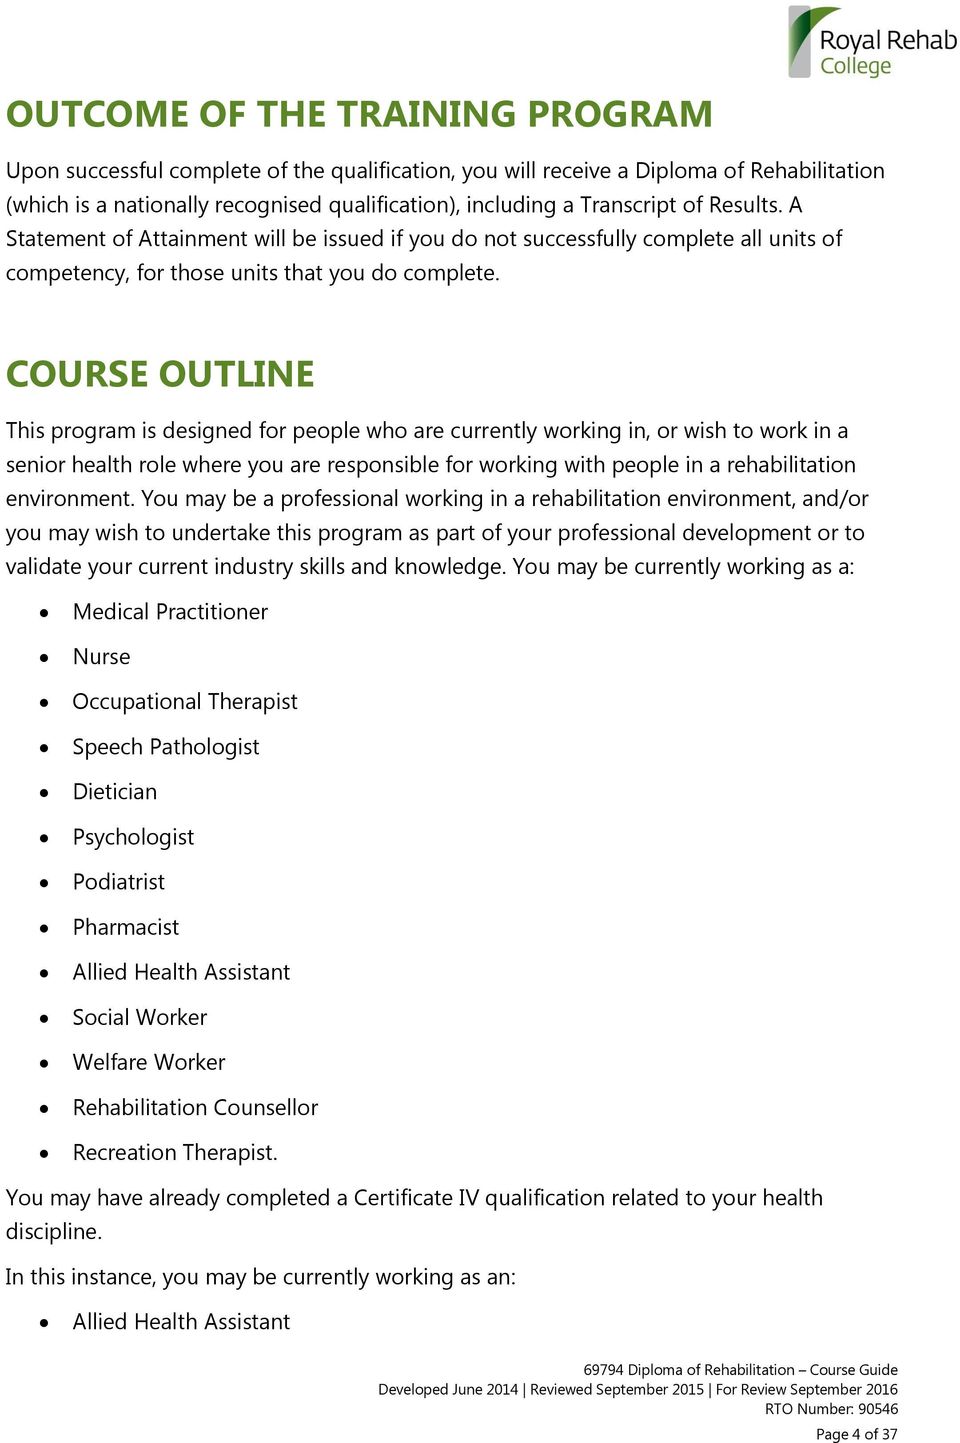 COURSE OUTLINE This program is designed for people who are currently working in, or wish to work in a senior health role where you are responsible for working with people in a rehabilitation